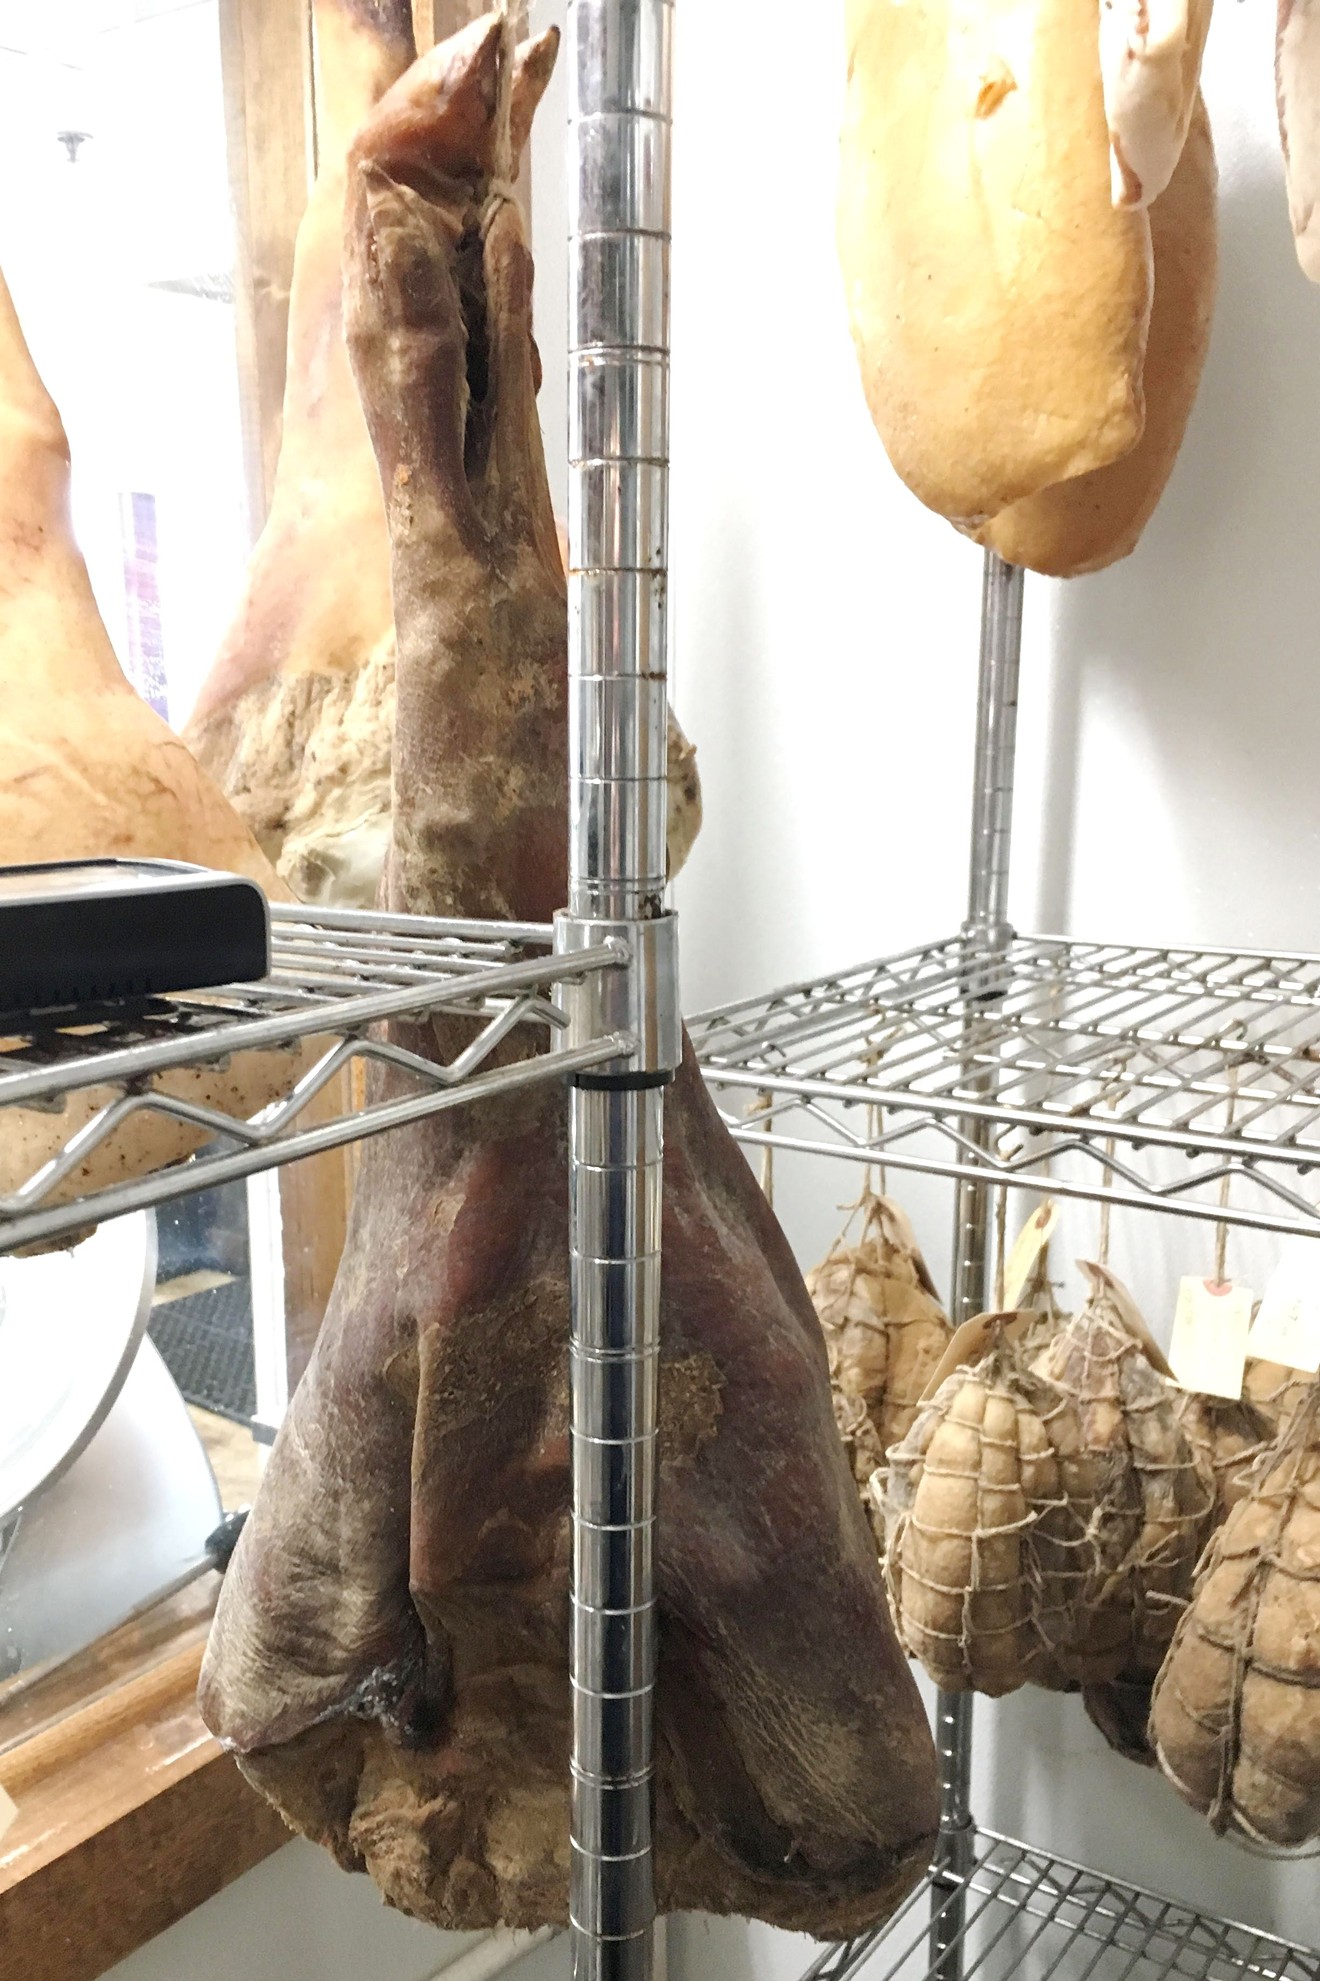 This country ham has been aging at Il Porcellino for 27 months.